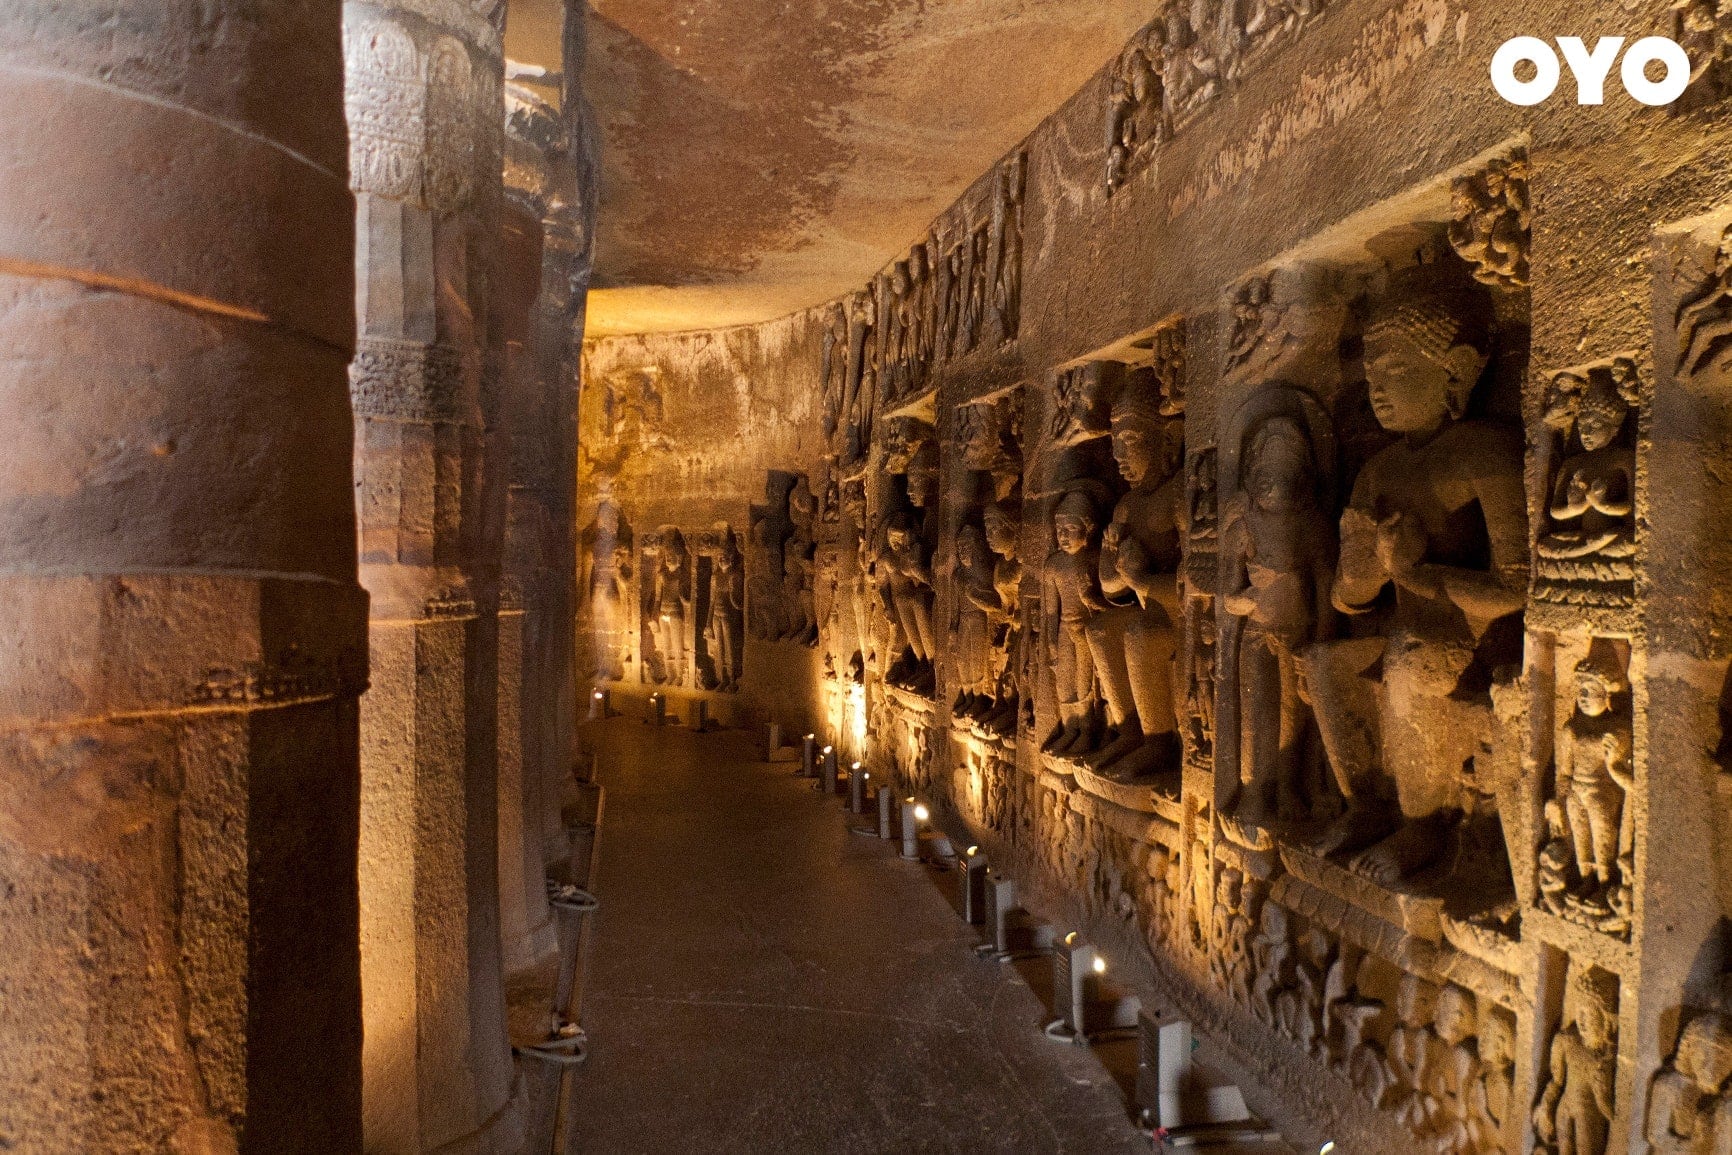 Ajanta and Ellora Caves, Maharashtra - one of the most famous historical monuments in India